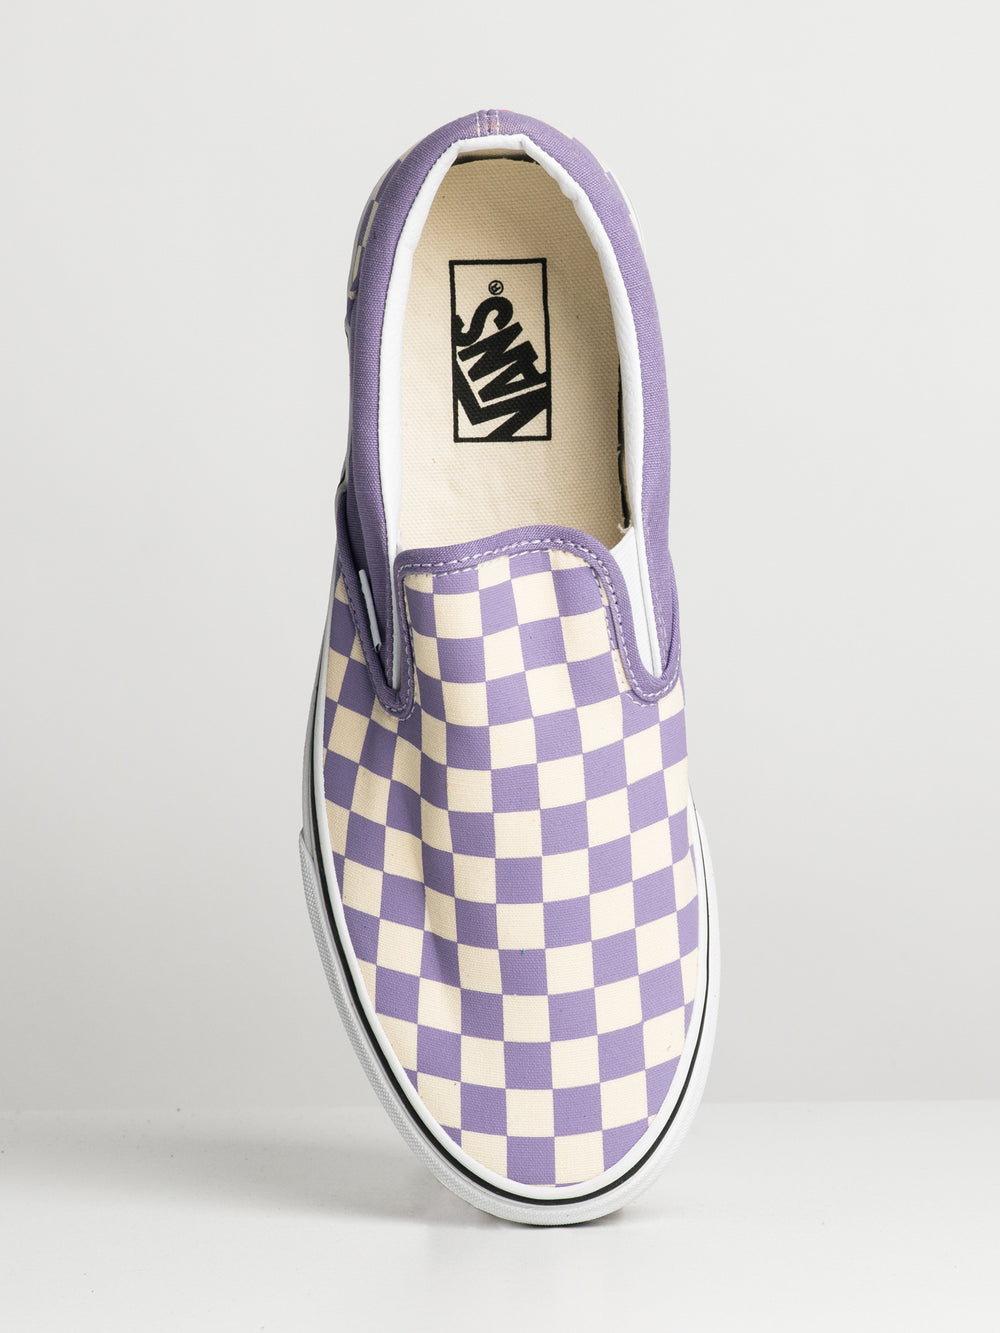 WOMENS VANS CLASSIC SLIP-ON CHECK  - CLEARANCE